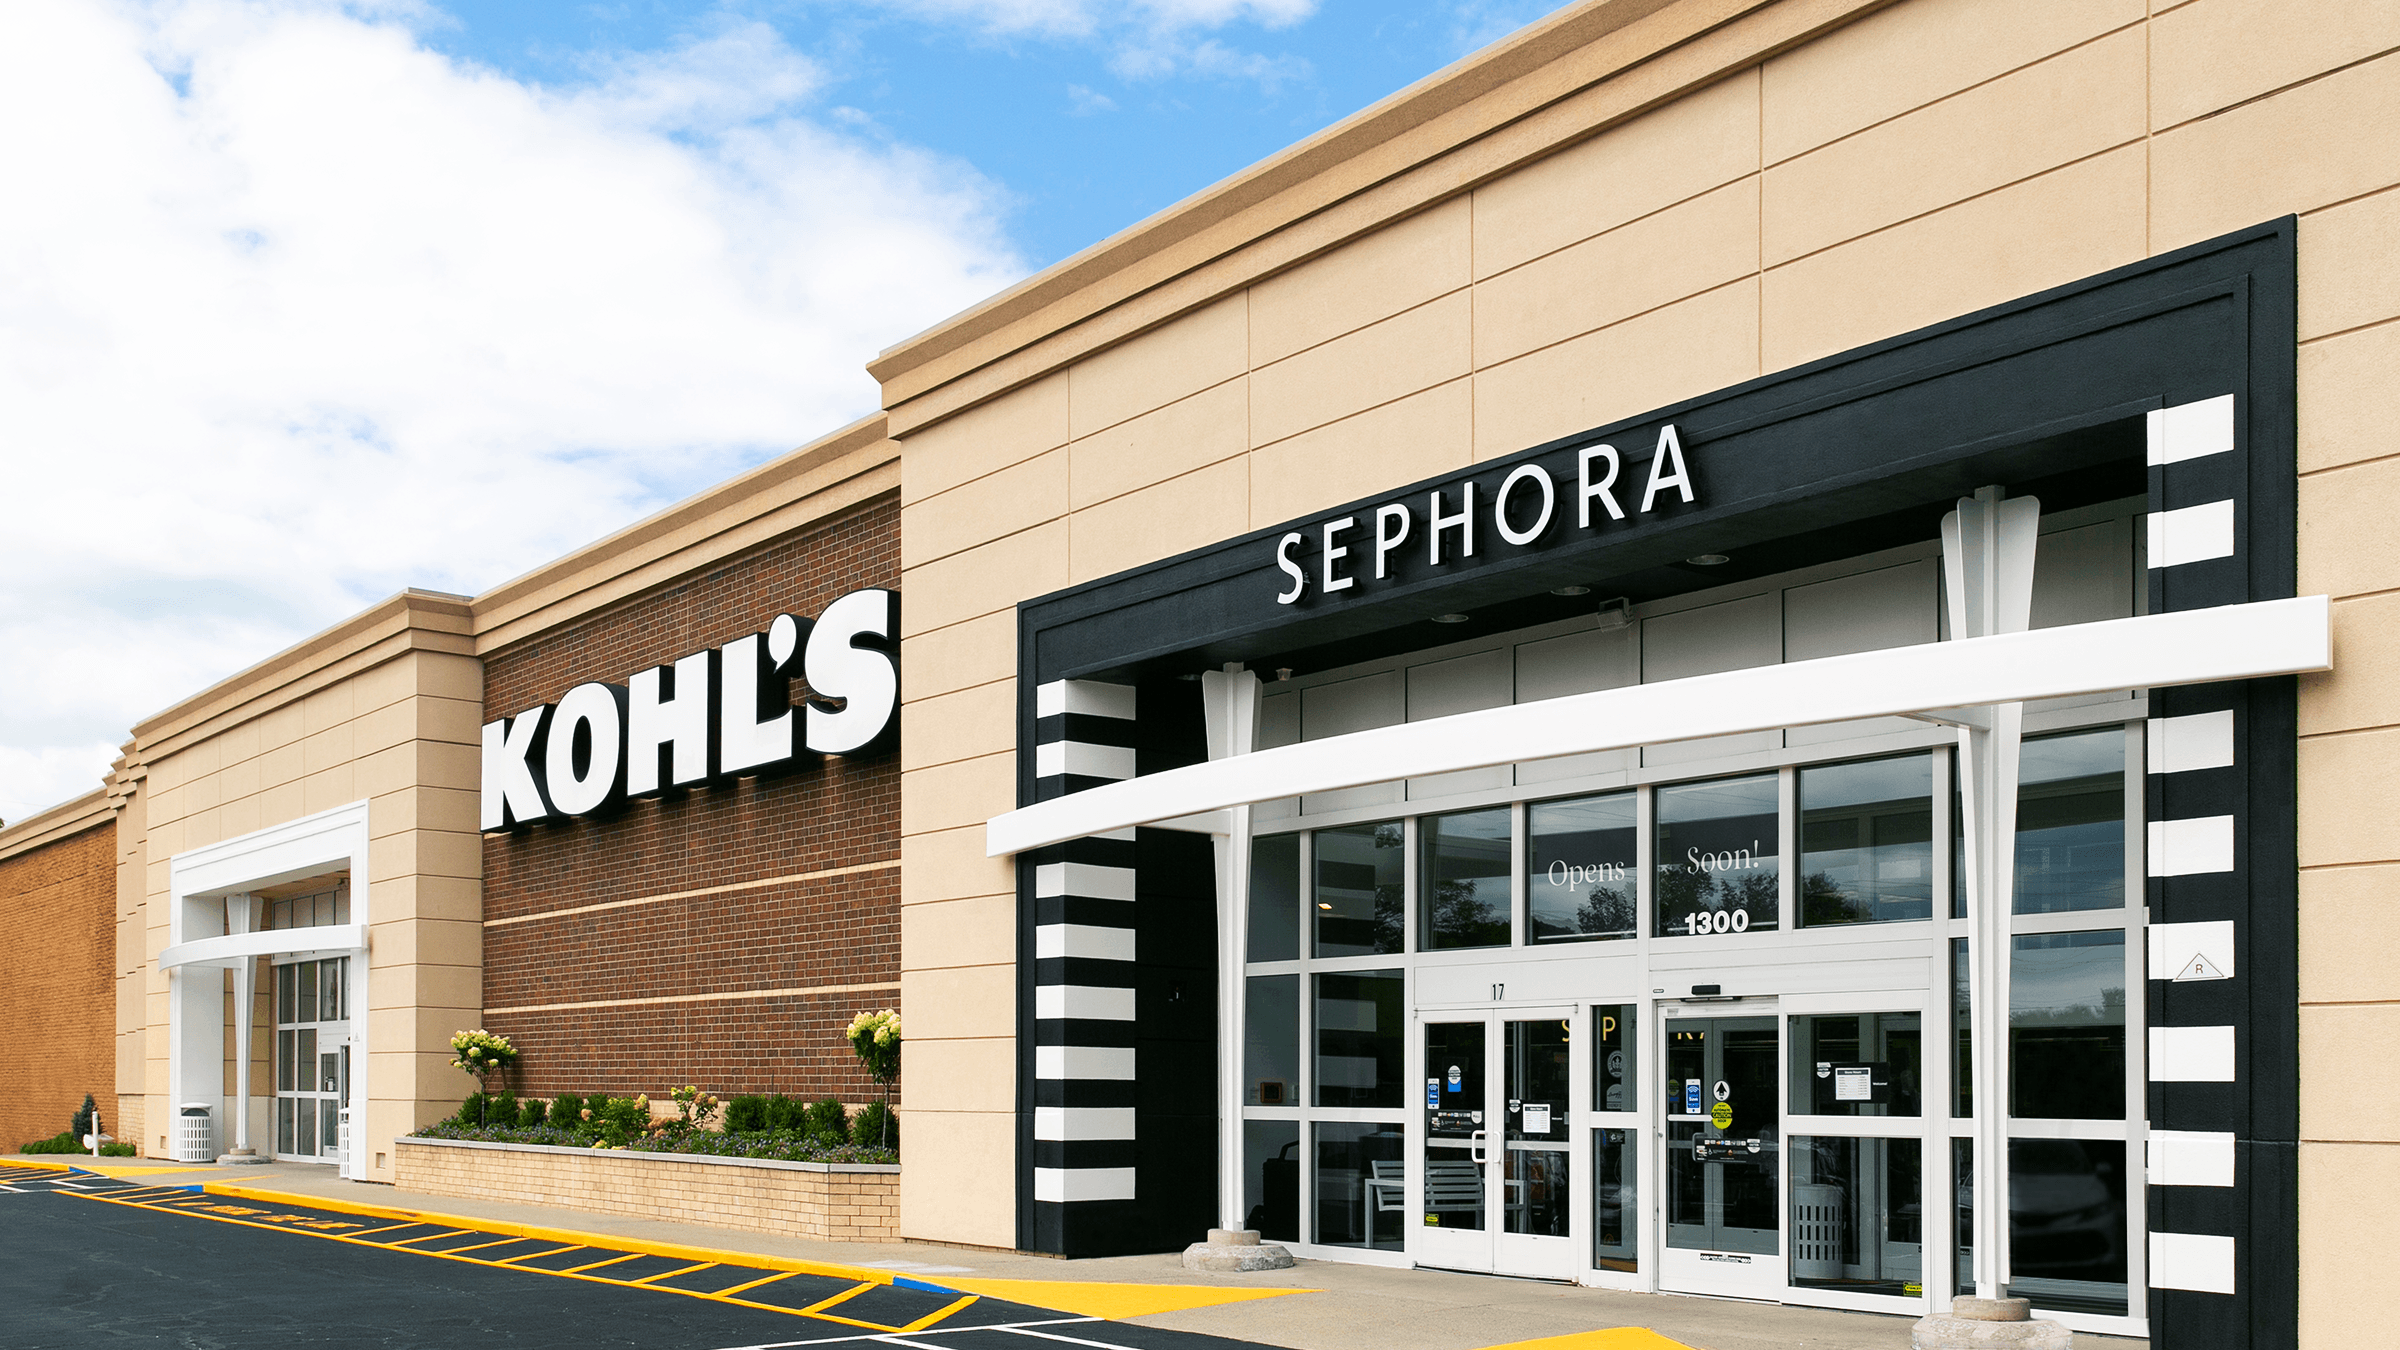 A Kohl's department store with an adjoining Sephora outlet